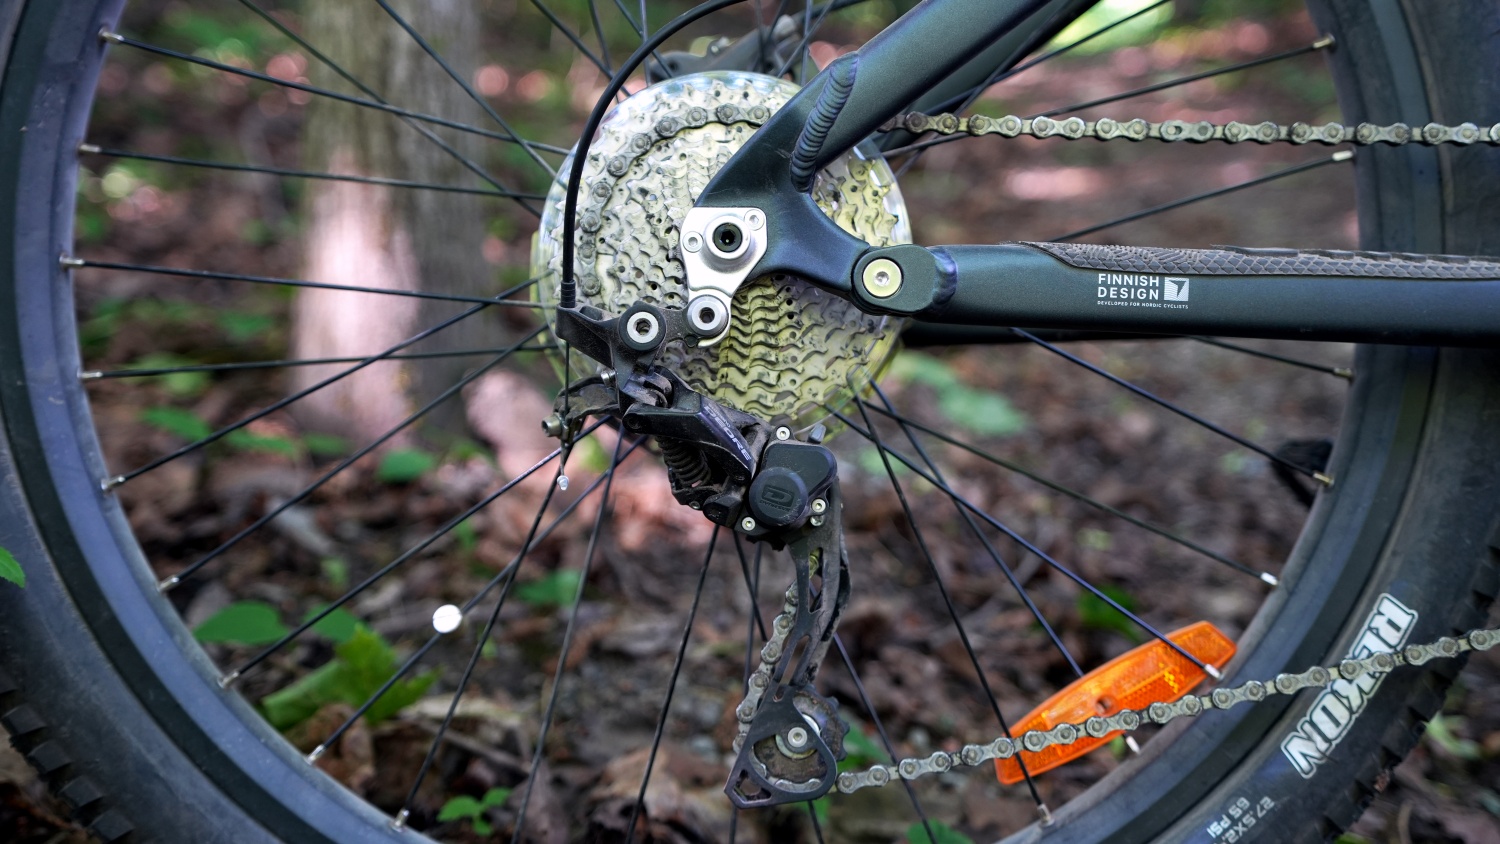 The 10-speed SHimano Deroe is fine, but I wish it came with an 11-42t cassette. The 11-36t hasn't got light enough gears. 